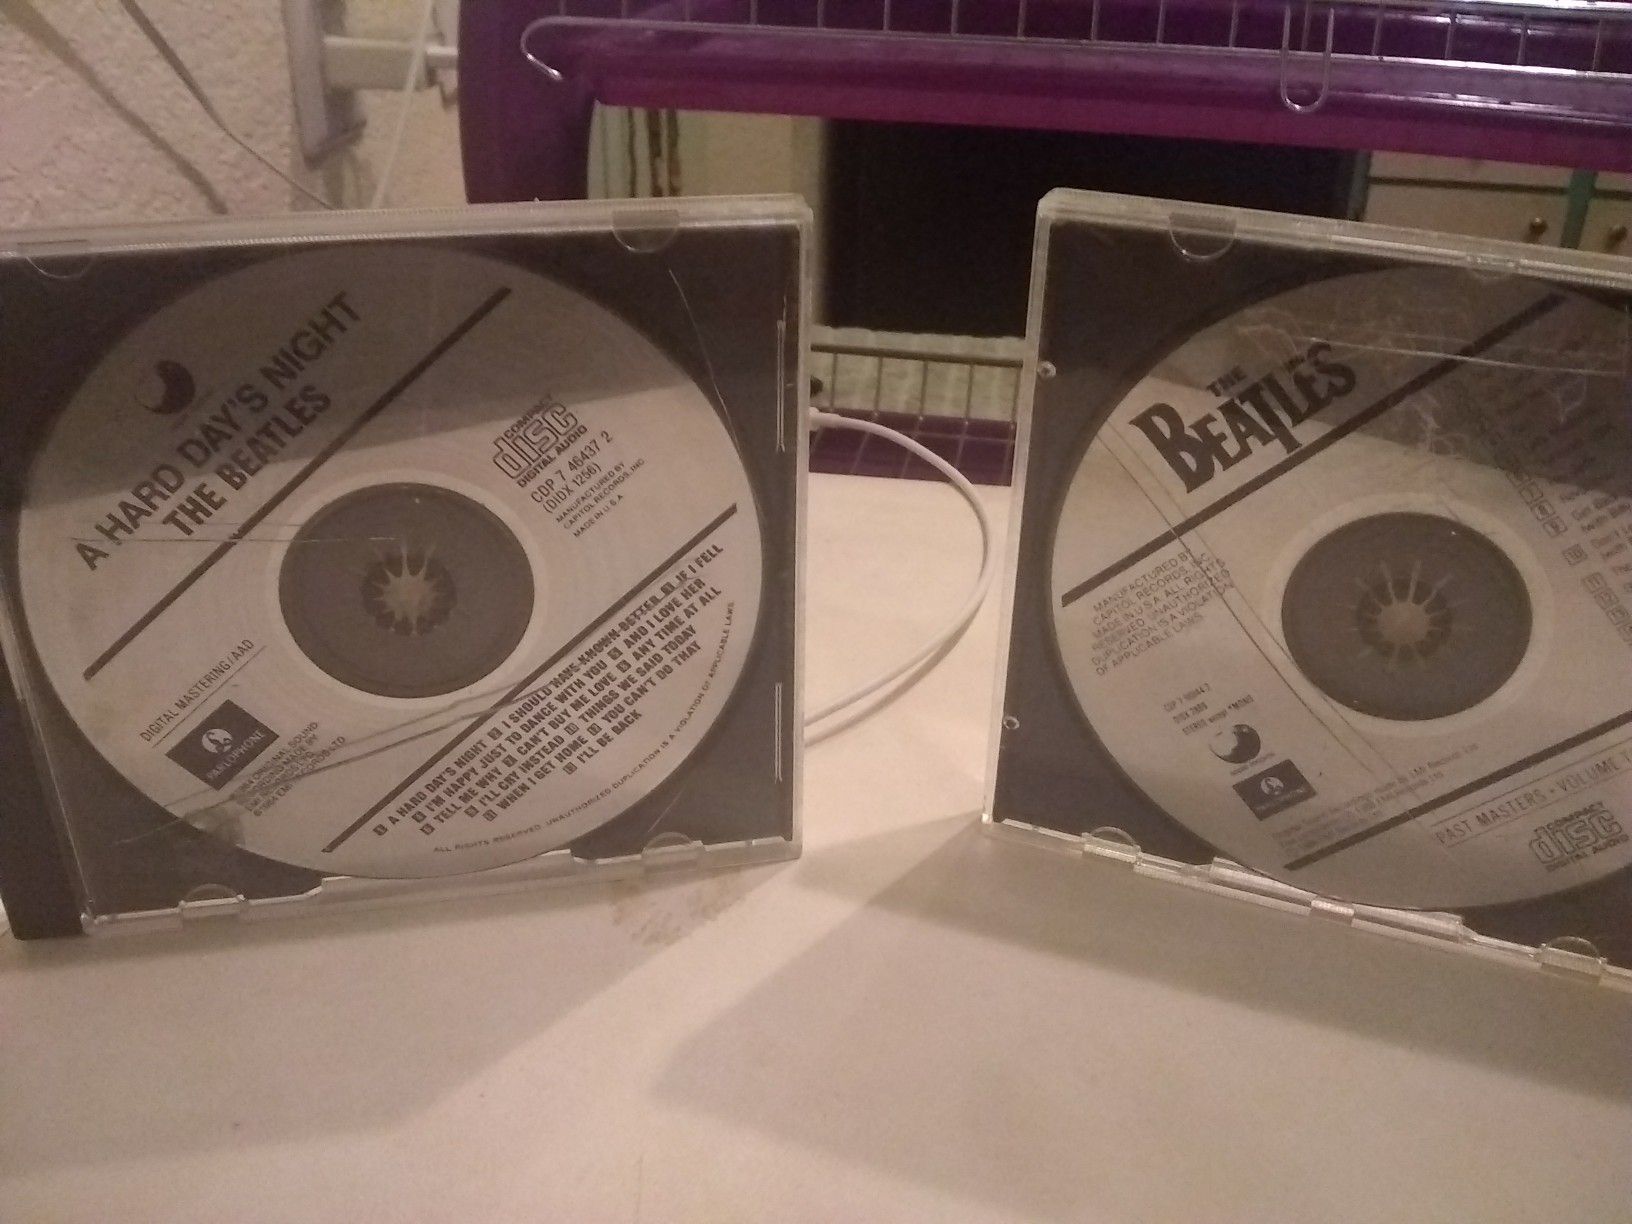 Collection item: 2 Beatles CD's